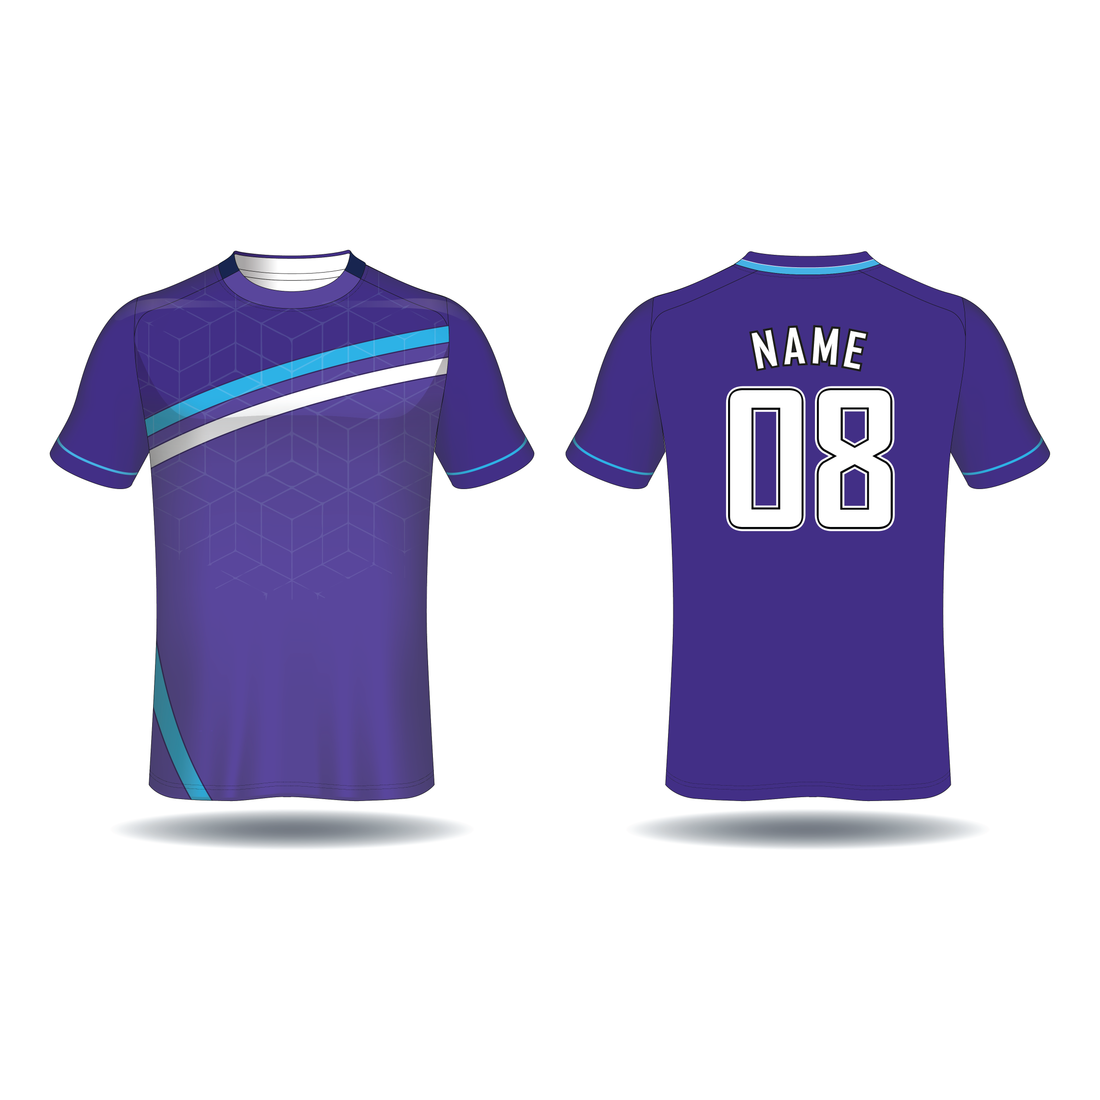 NEXT PRINT All Over Printed Customized Sublimation T-Shirt Unisex Sports Jersey Player Name & Number, Team Name NP50000283